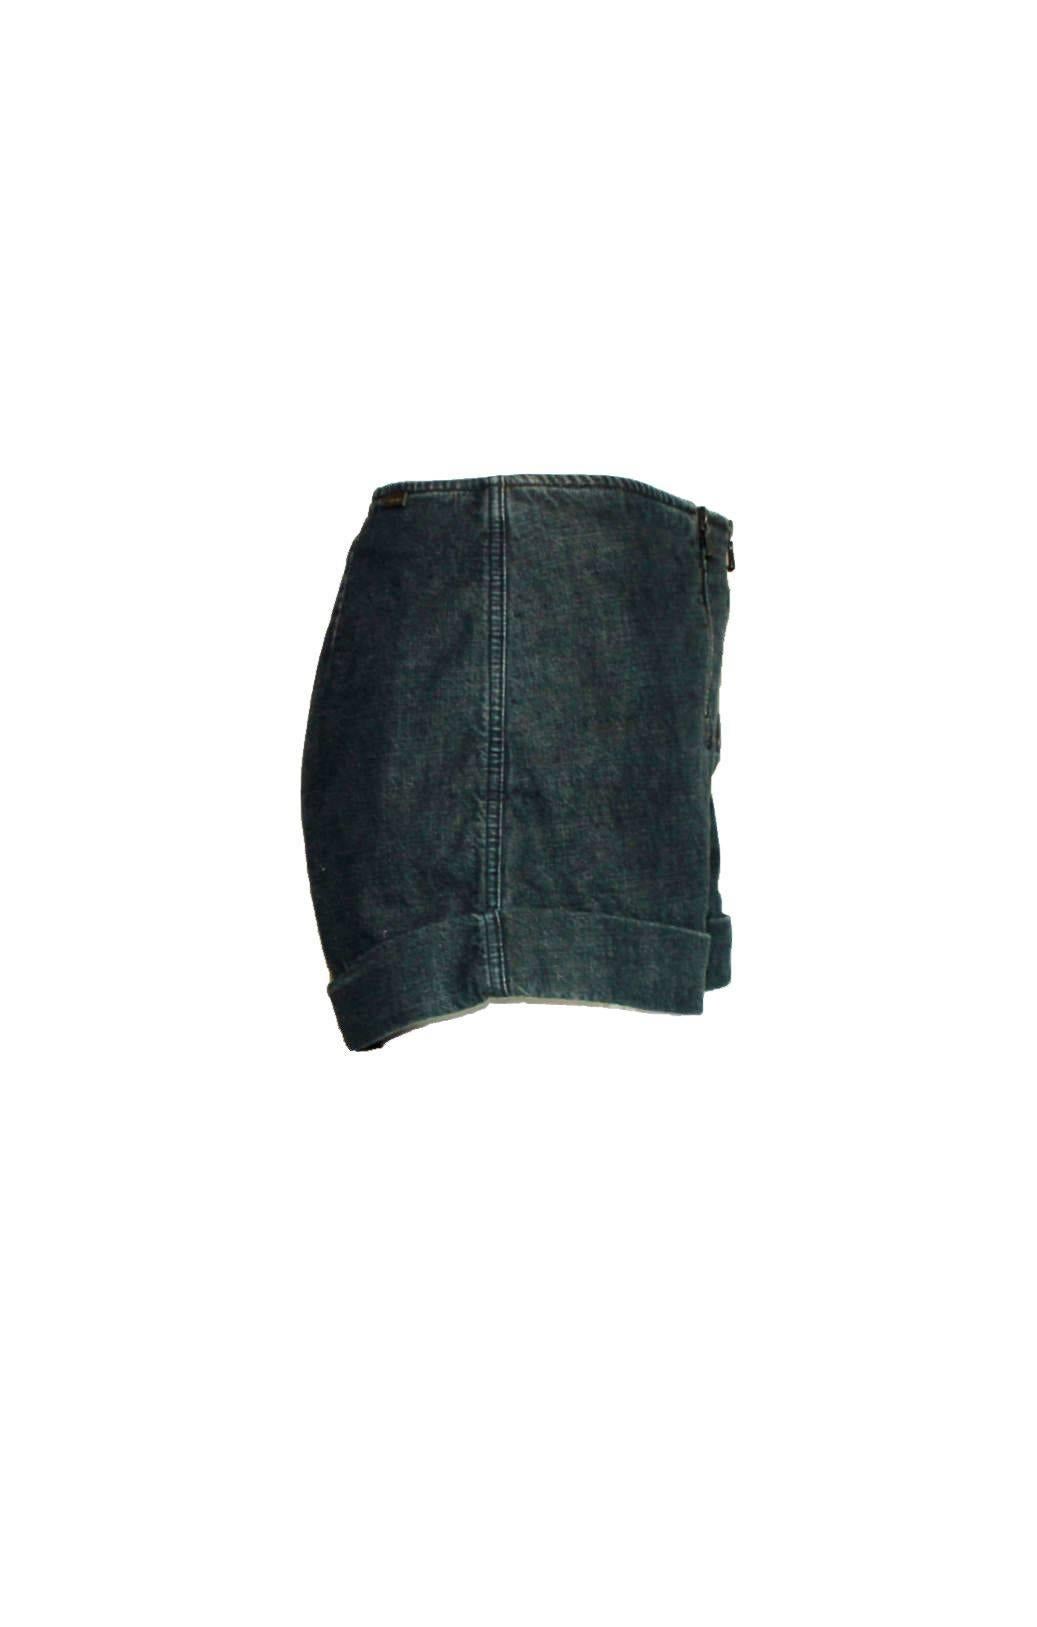 
    Beautiful CHANEL denim hot pants
    A true CHANEL signature item that will last you for many years
    Opens with a triple zip on front marked "CHANEL"
    Chanel plate on back
    Made in France
   